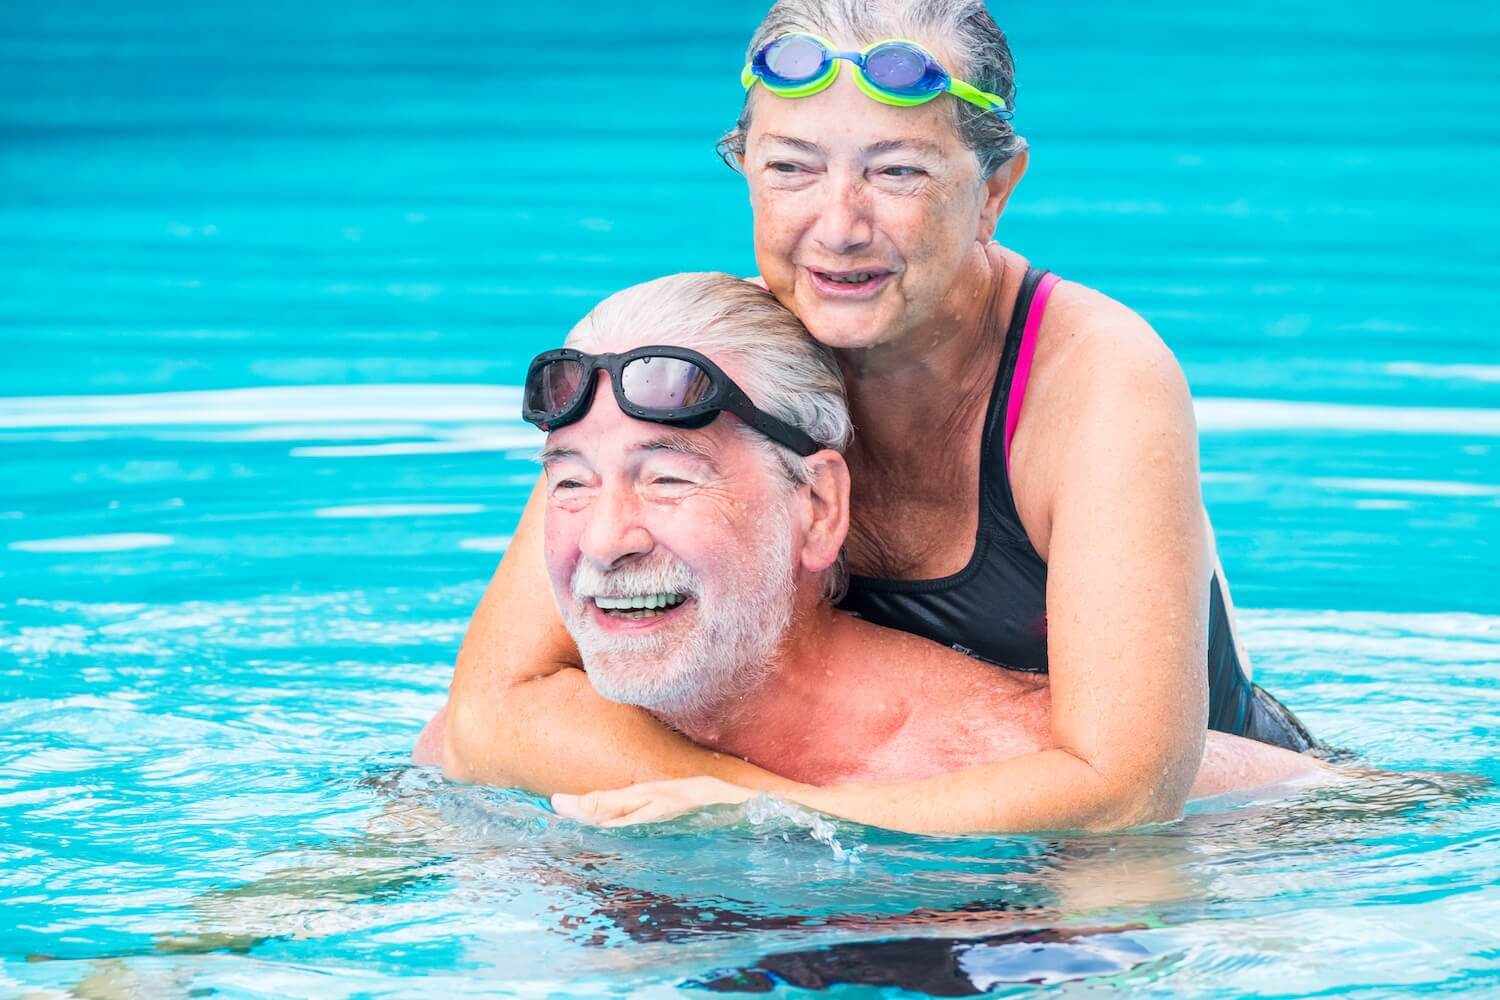 two pensioners or mature old people enjoying summer and vacations in the swimming pool together having fun smiling and laughing - couple of cute seniors in love - happy lifestyle and healthy concept